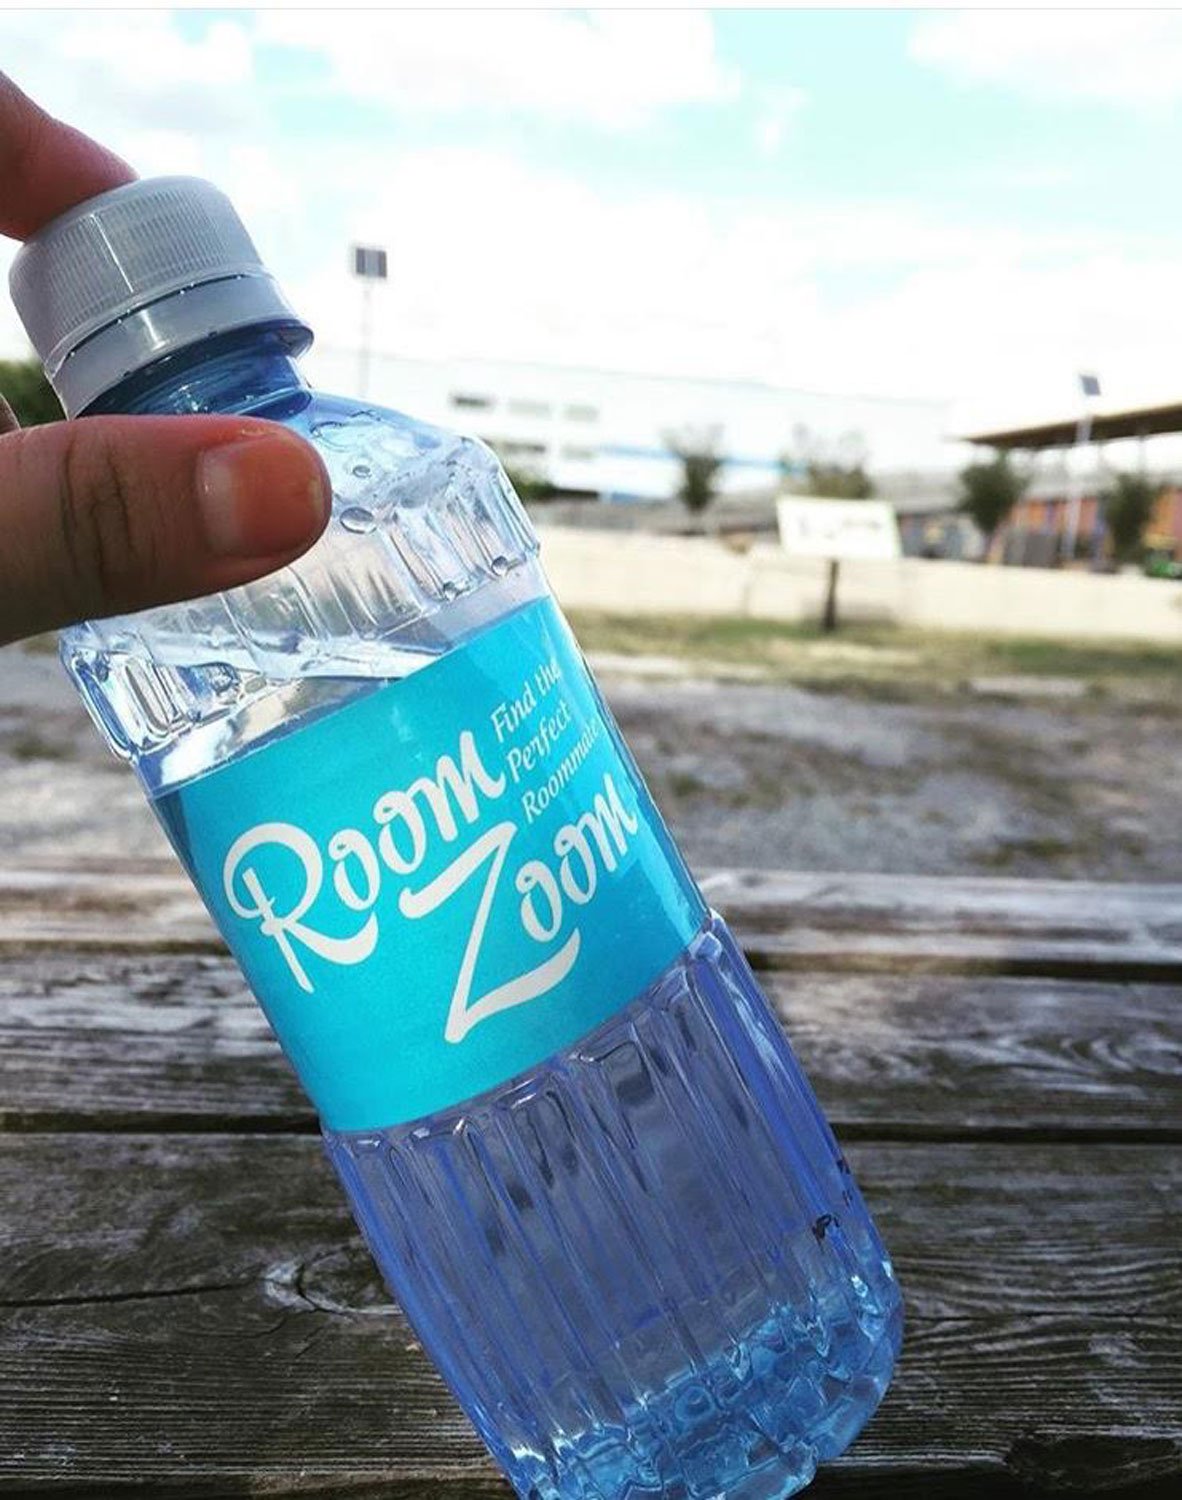 Custom labeled water for charity runs and walks